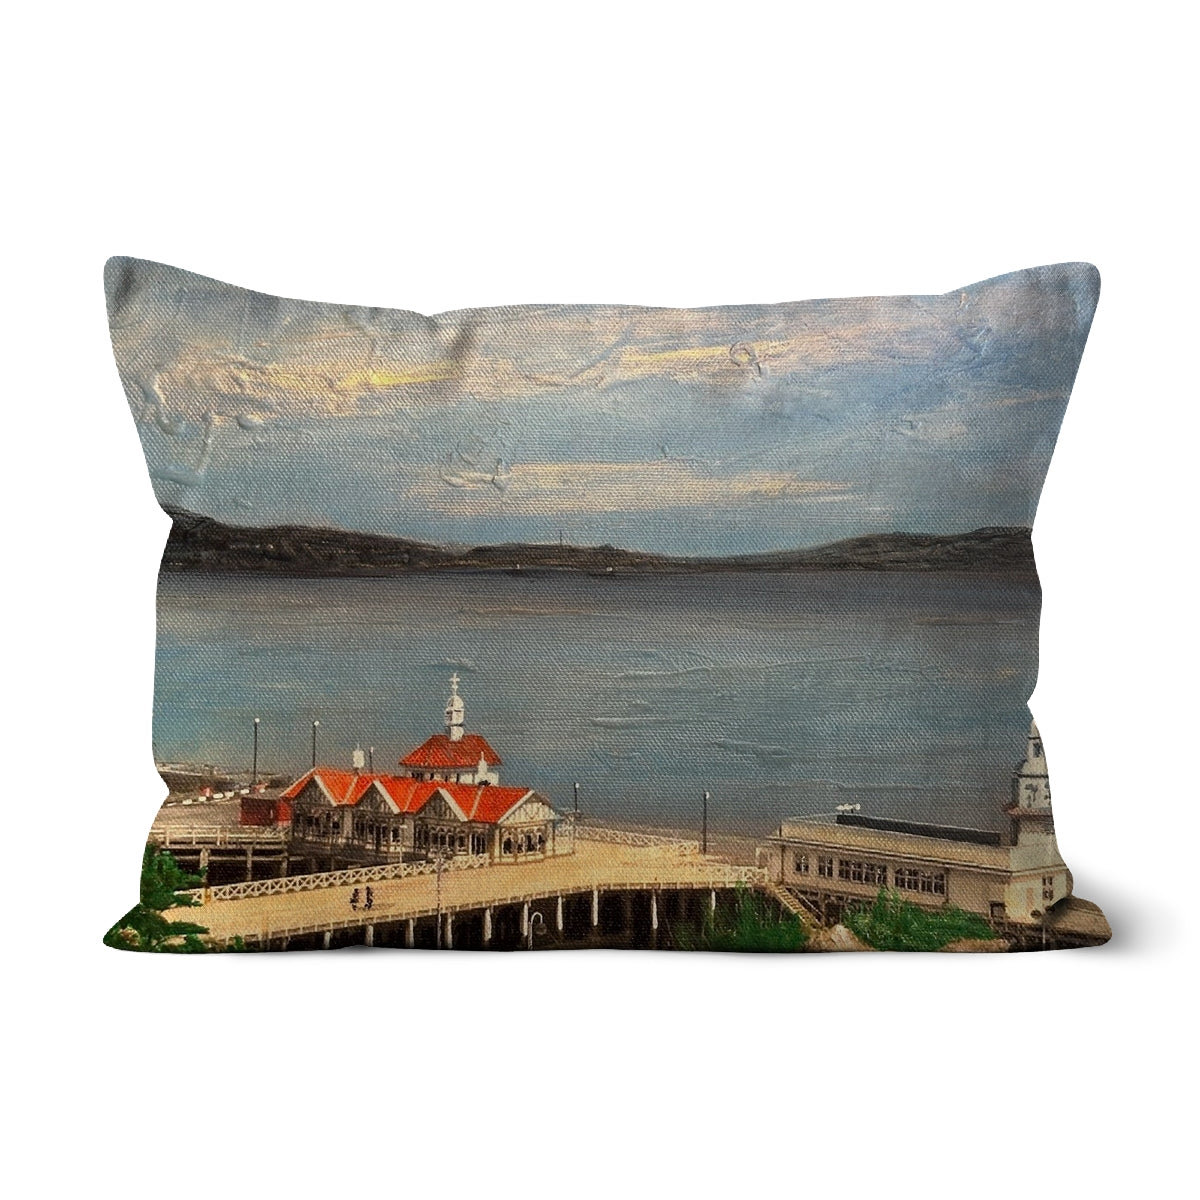 Looking From Dunoon Art Gifts Cushion-Cushions-River Clyde Art Gallery-Linen-19"x13"-Paintings, Prints, Homeware, Art Gifts From Scotland By Scottish Artist Kevin Hunter